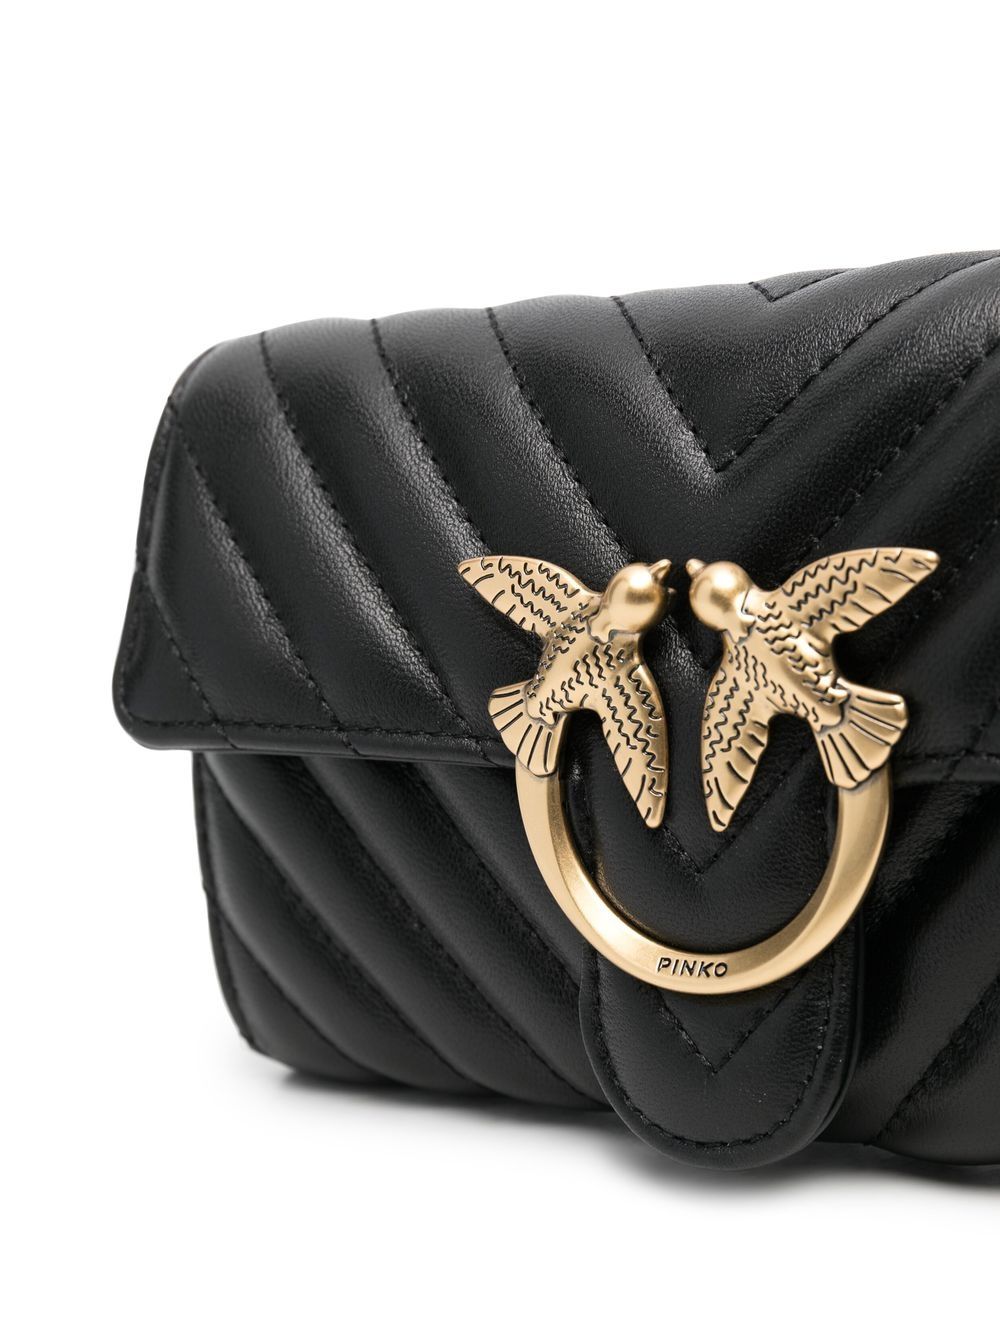 PINKO Quilted Leather Shoulder Bag - Farfetch